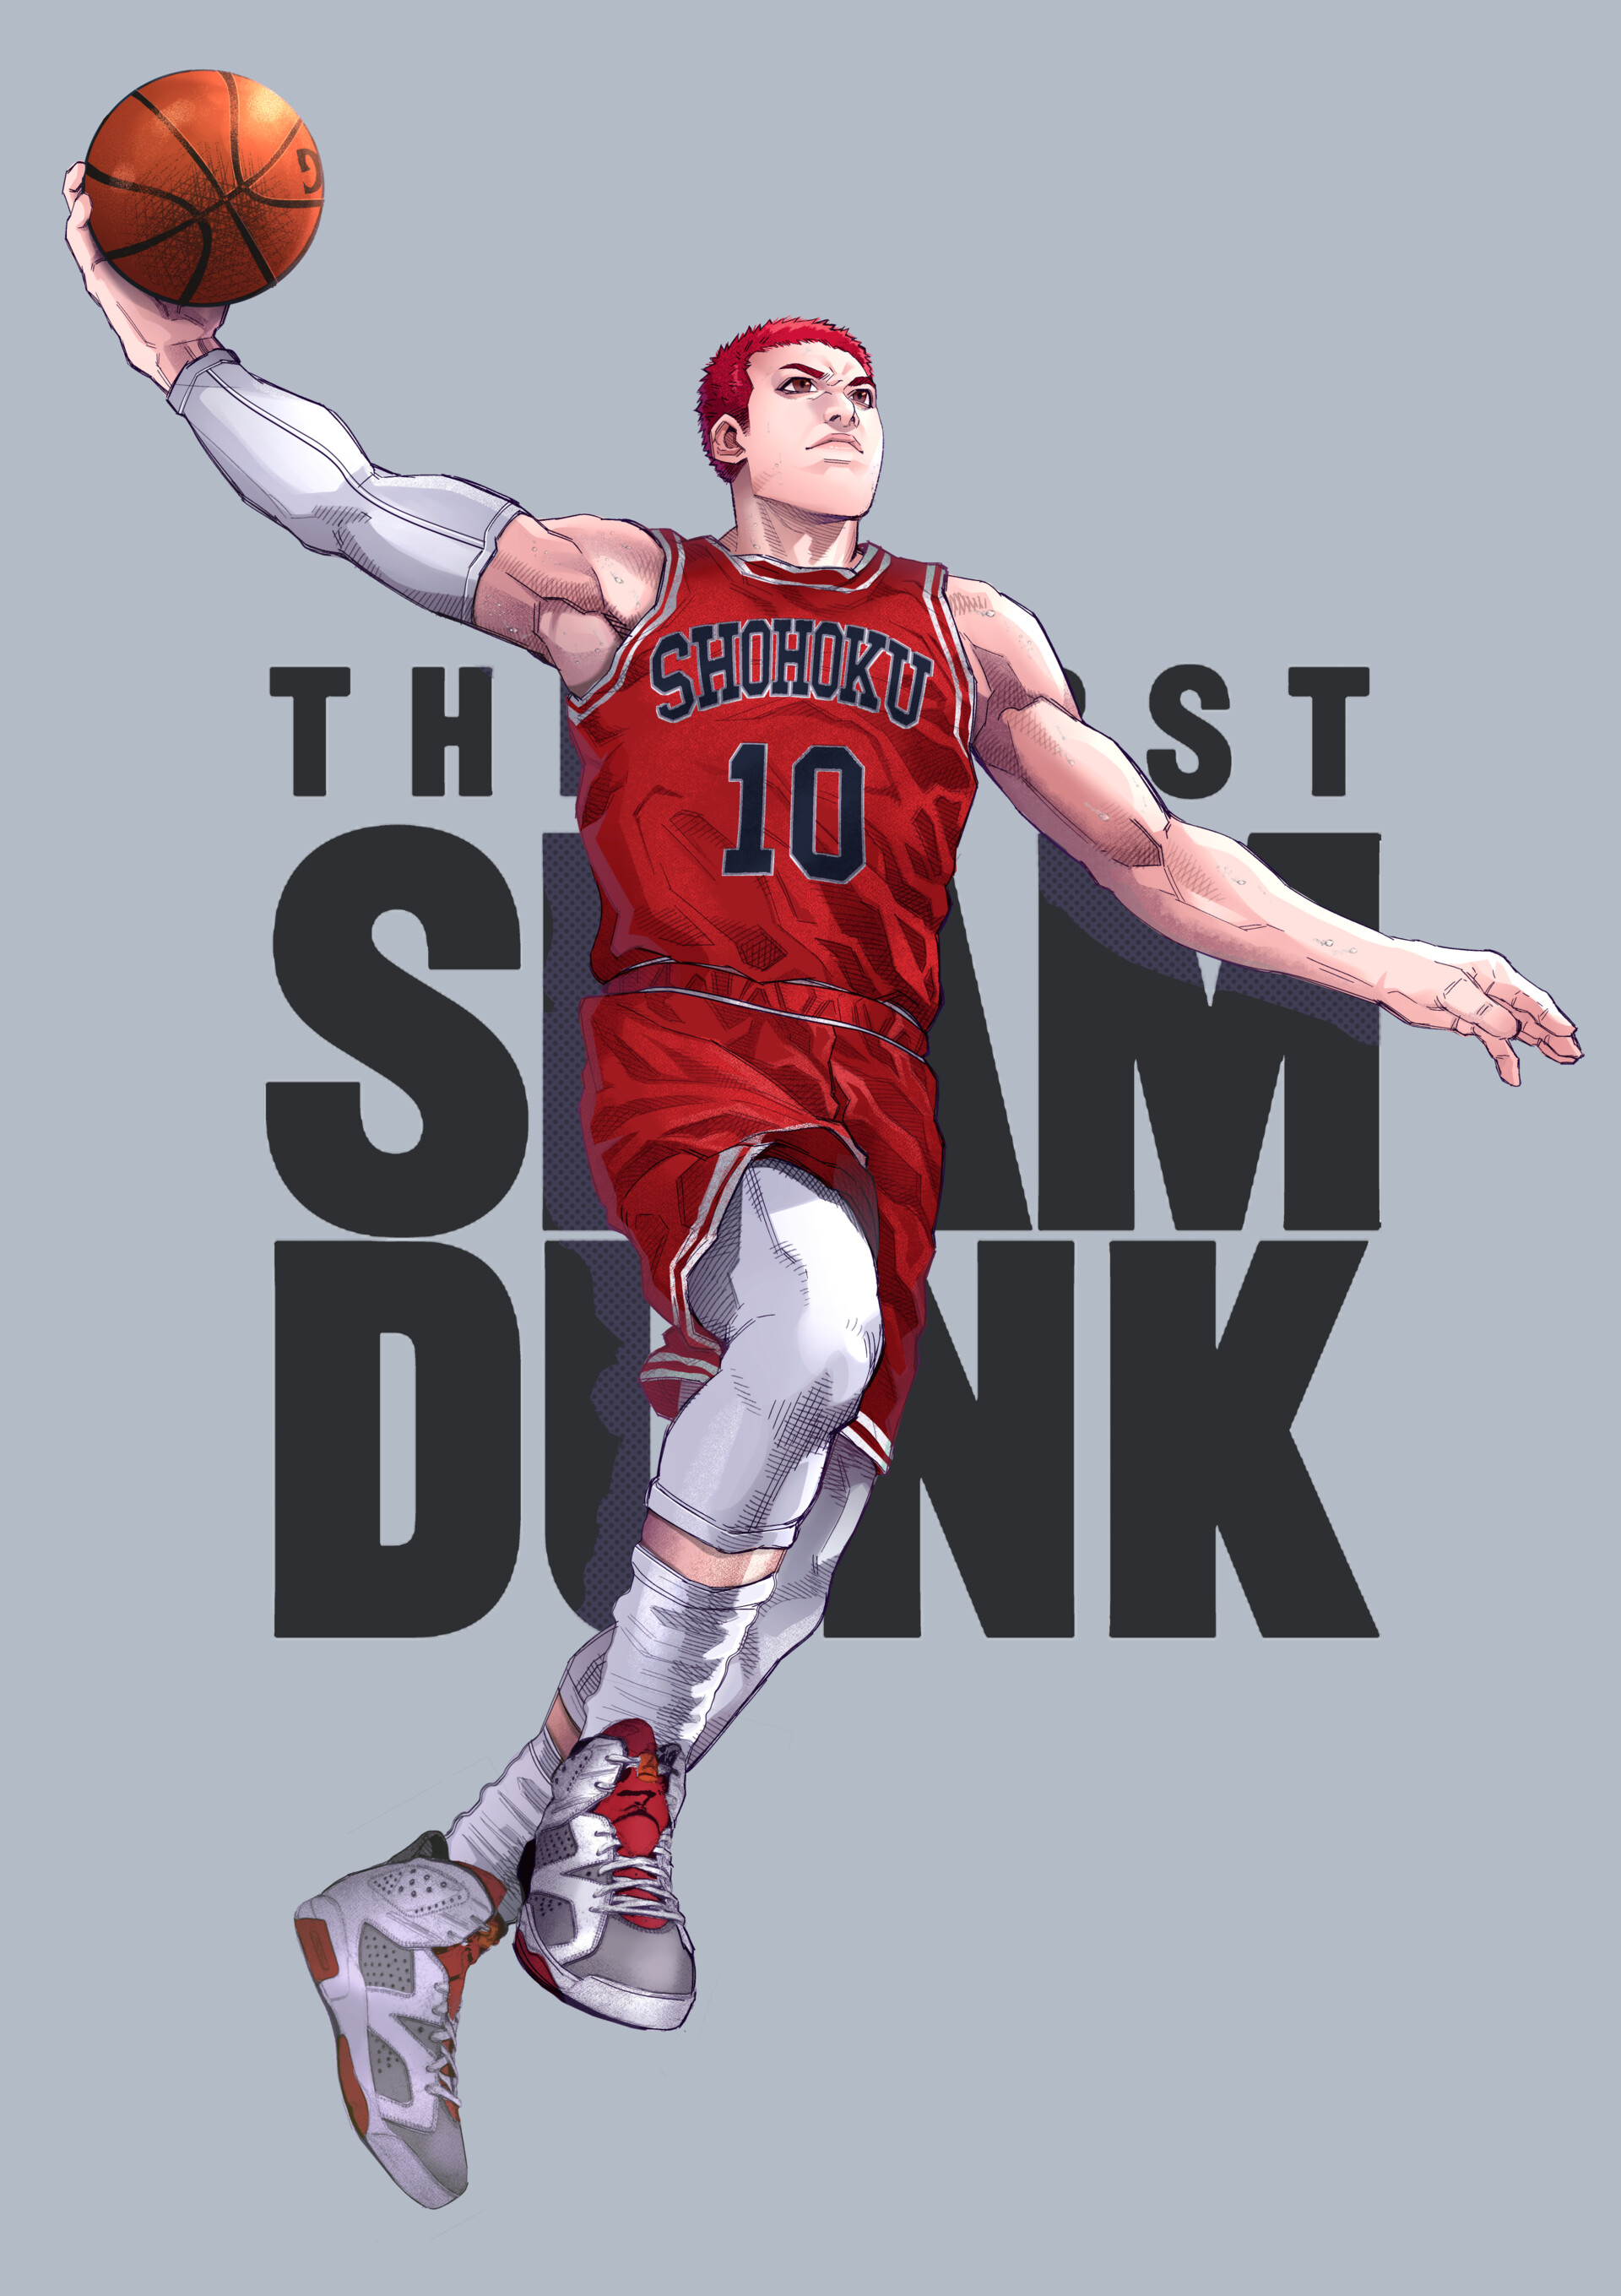 The First Slam Dunk Wallpapers - Wallpaper Cave